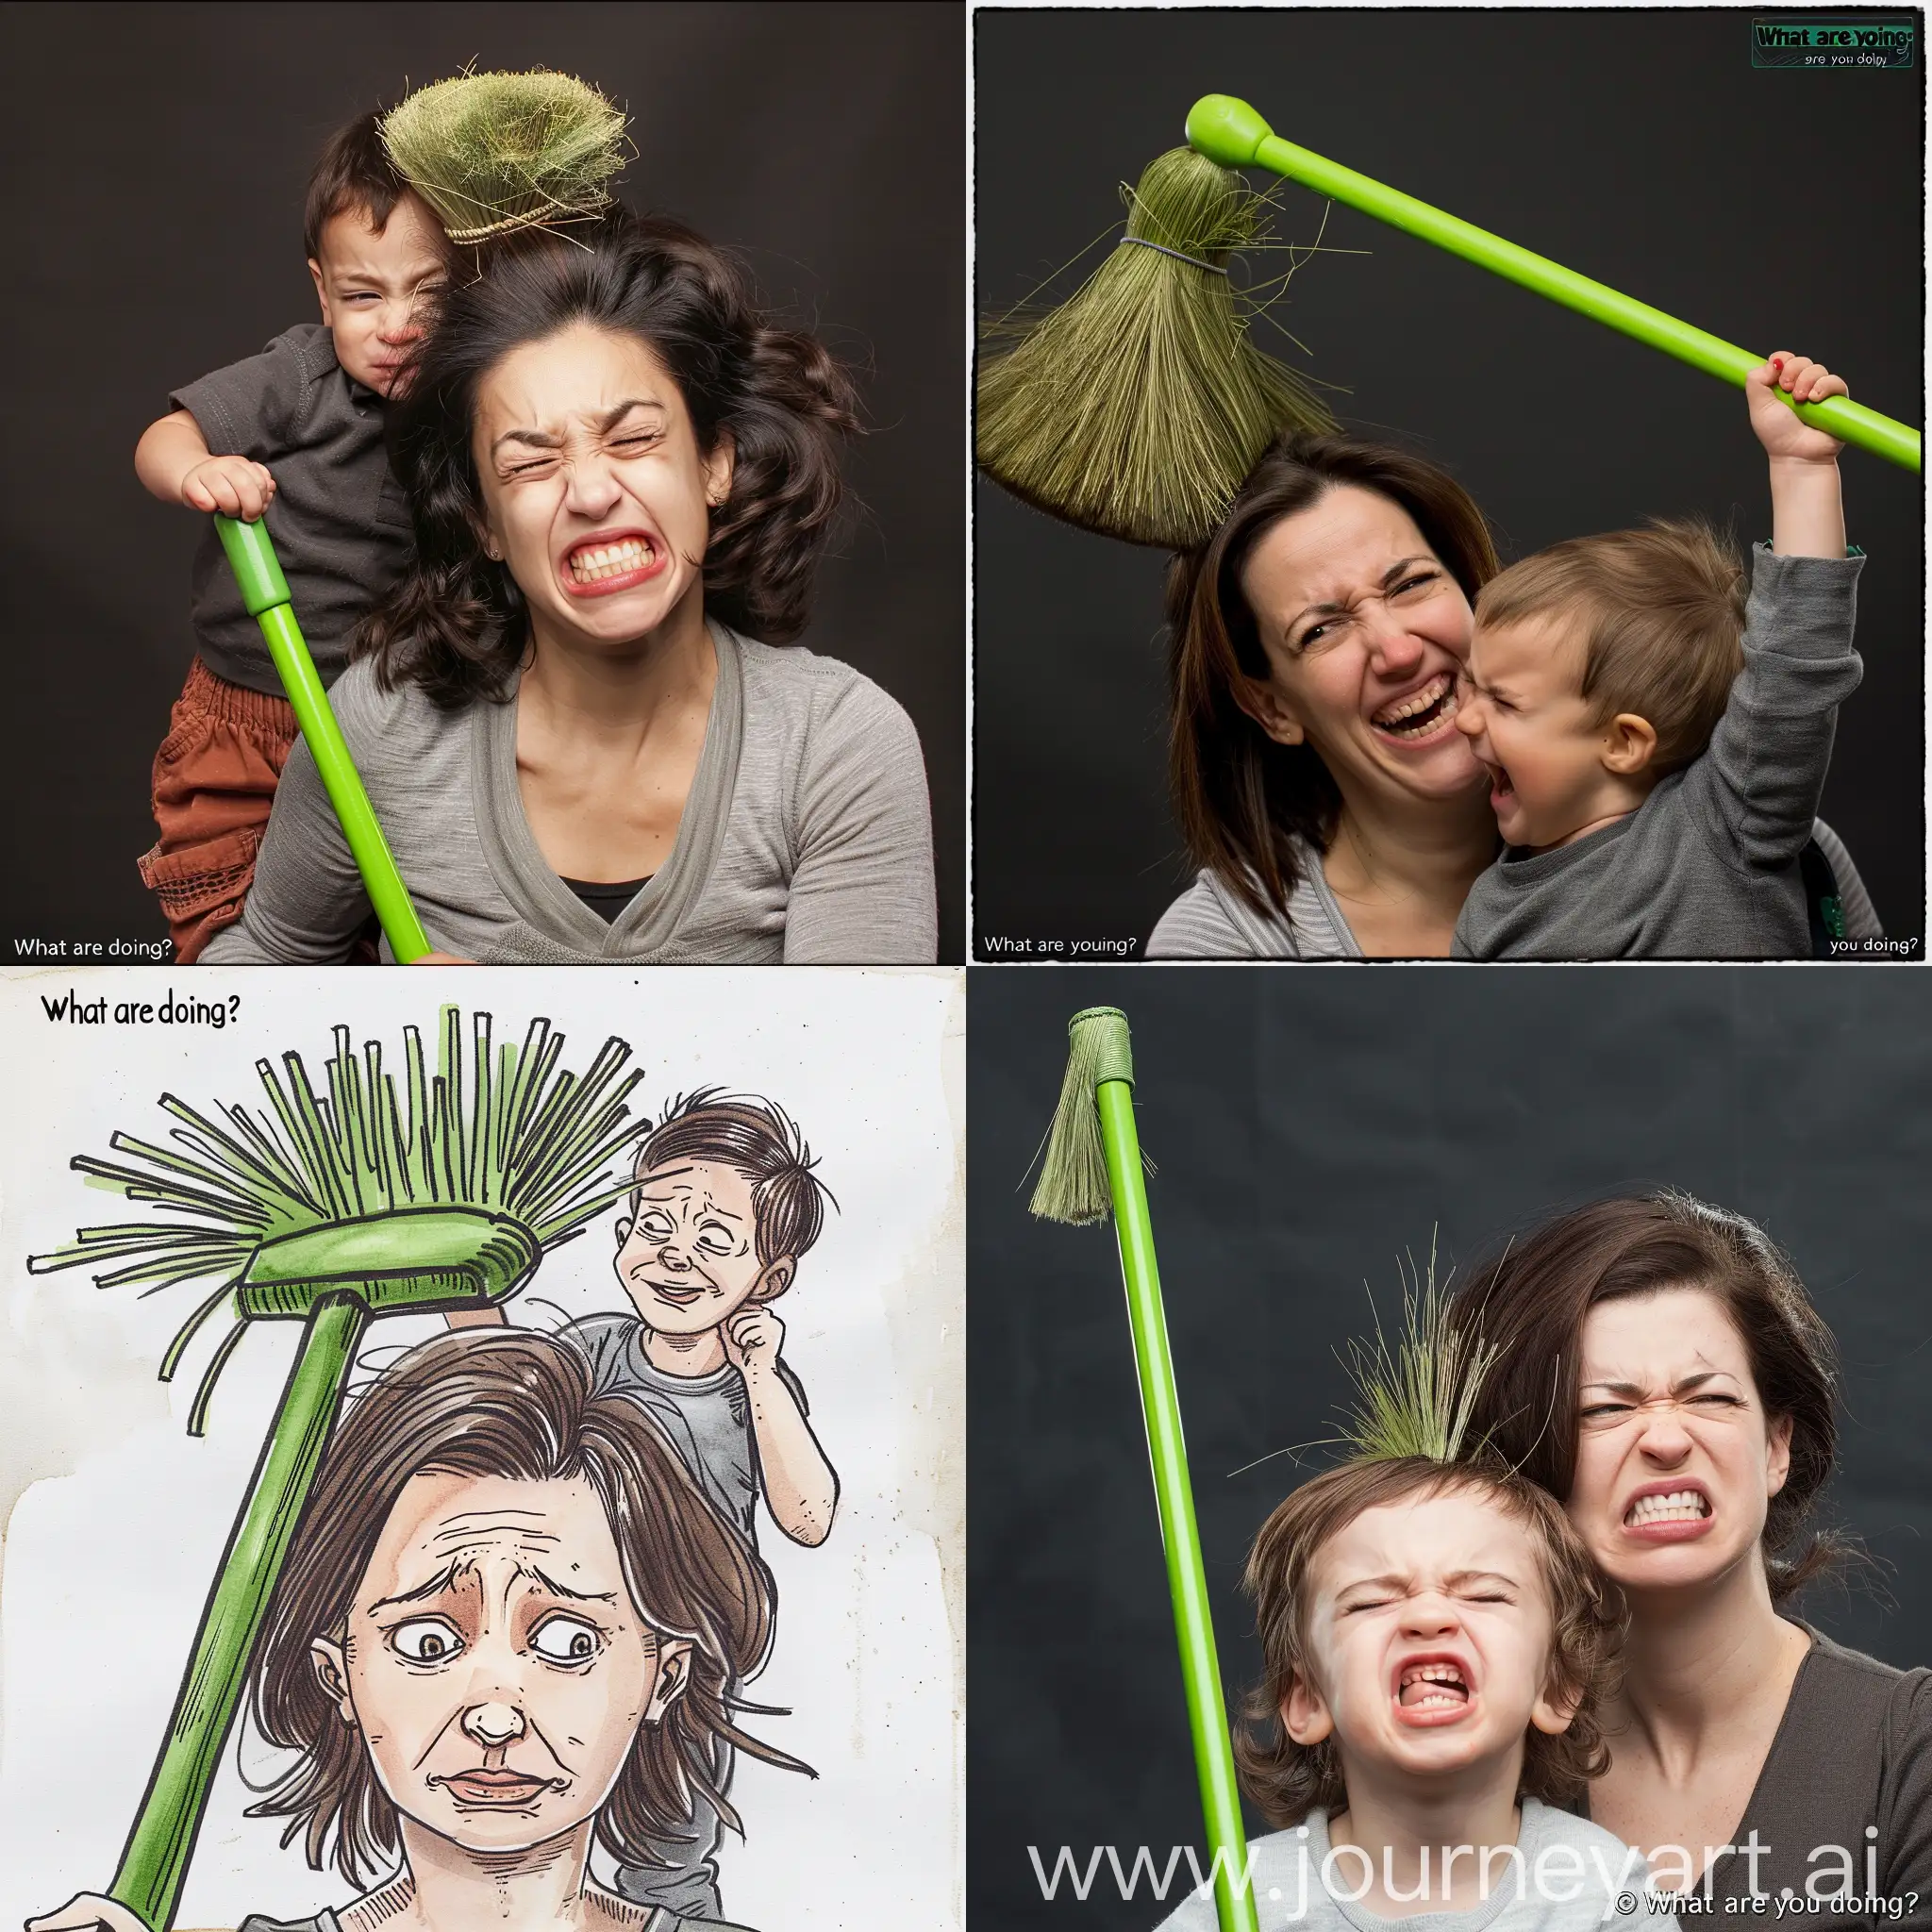 Playful-Toddler-Sweeping-Mothers-Head-with-Green-Broom